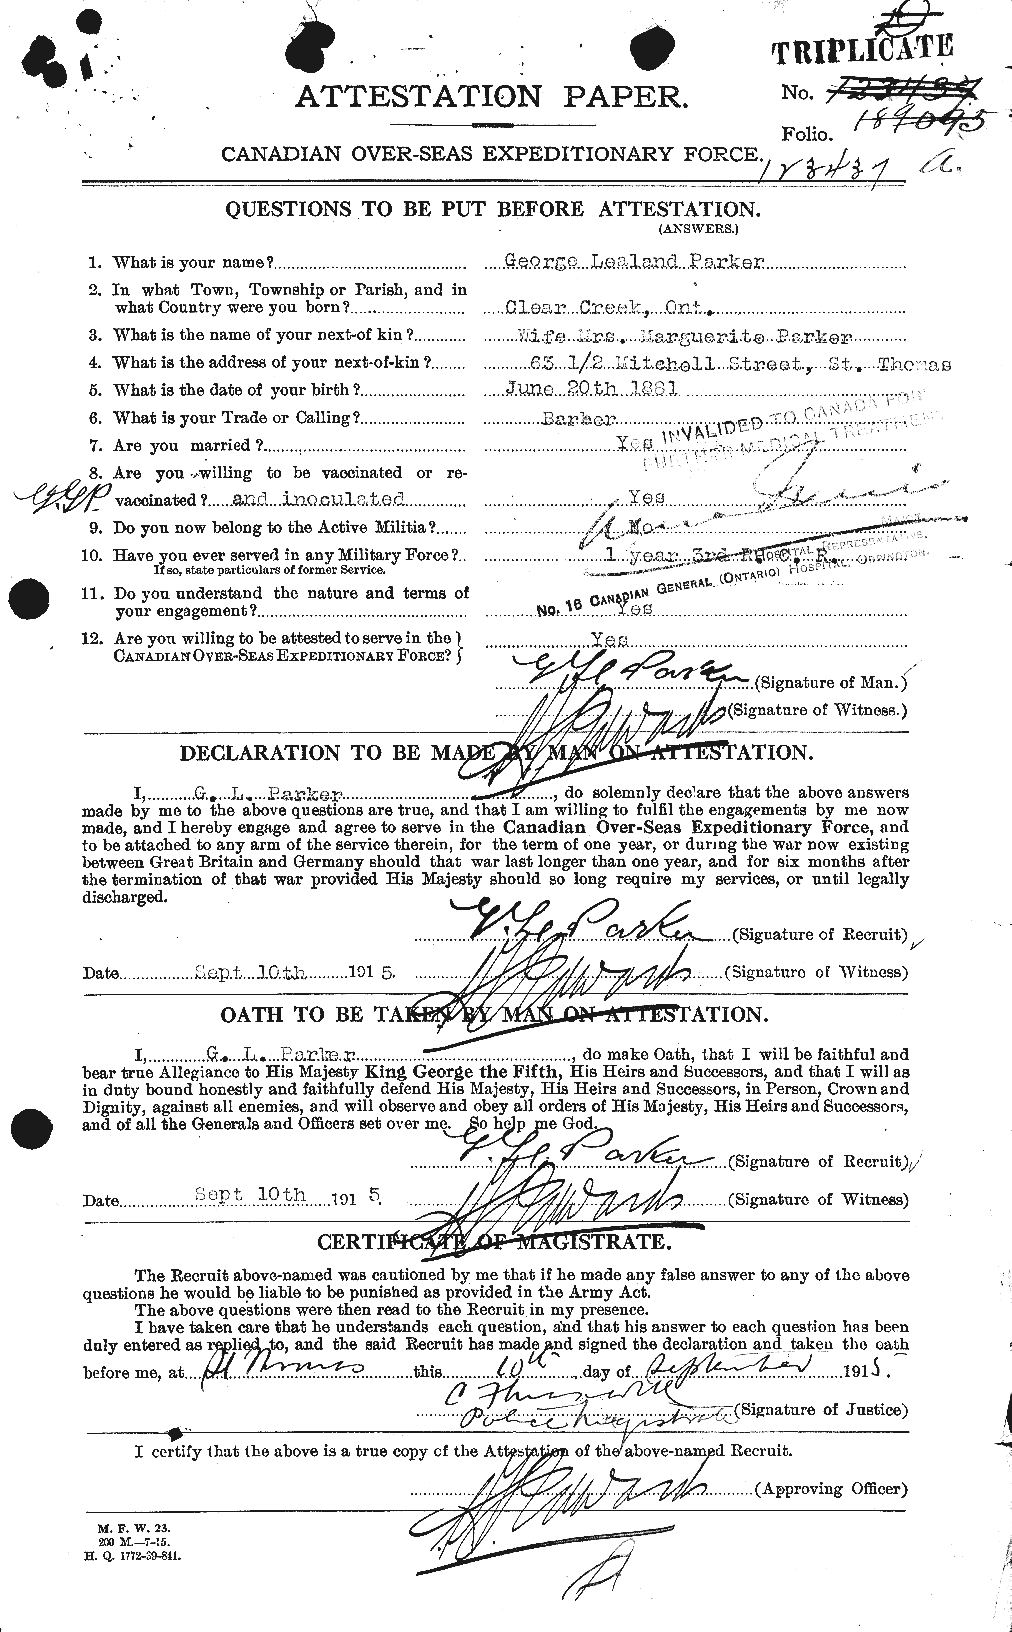 Personnel Records of the First World War - CEF 565275a